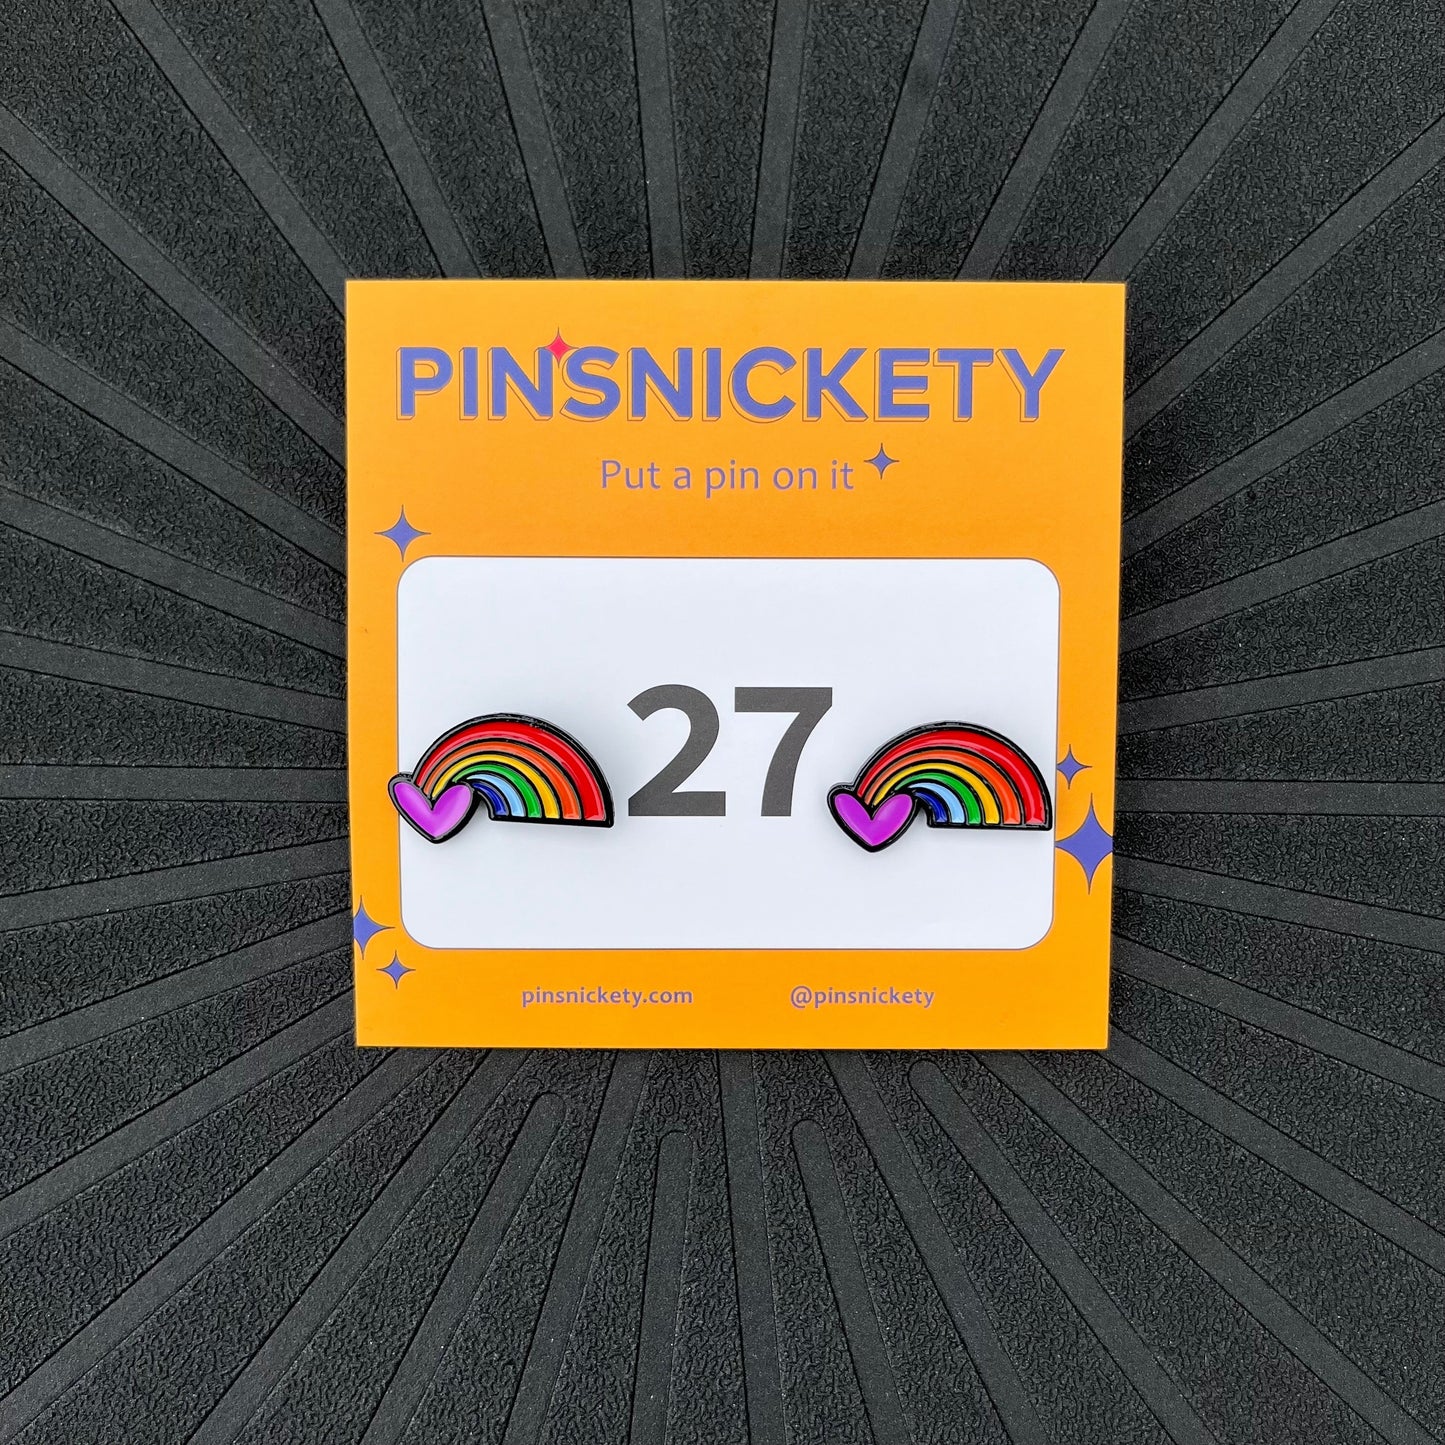 Pinsnickety Rainbow horse show number pins on their product packaging card